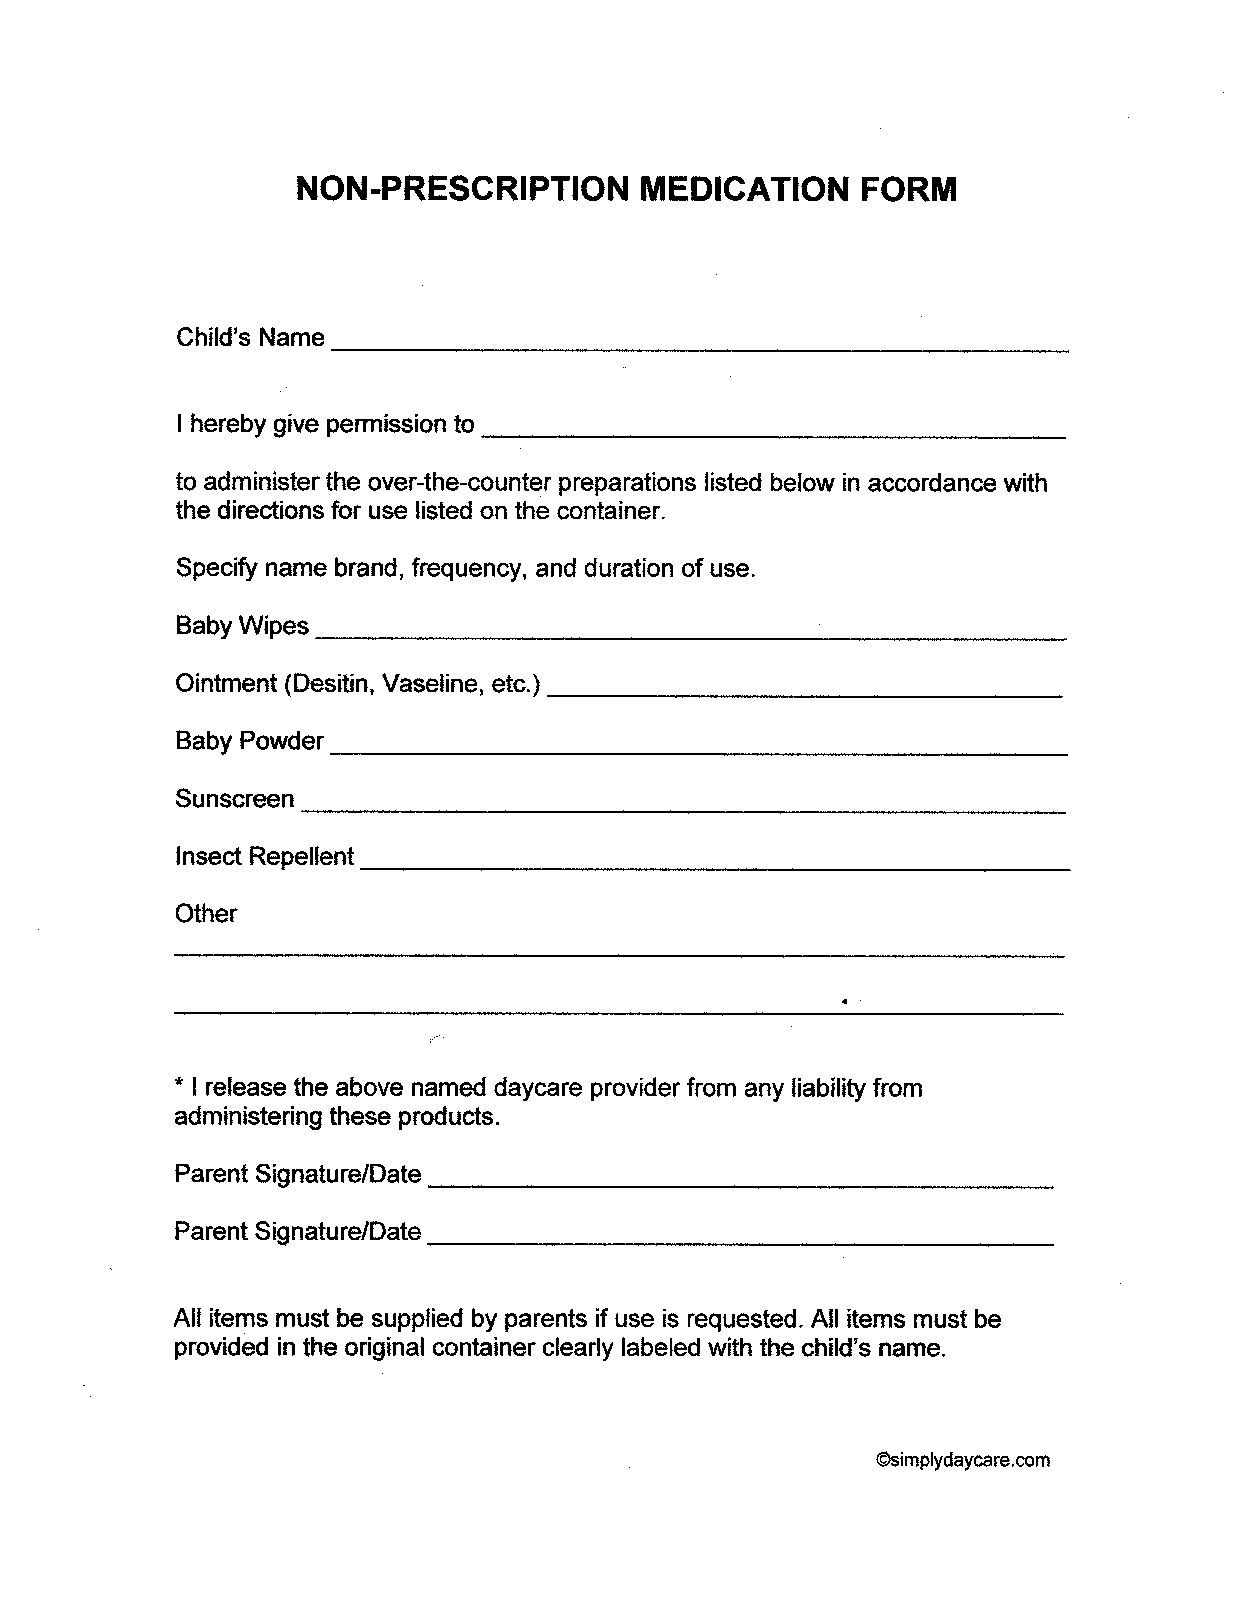 Free Child Care Forms To Make Starting Your Daycare Even Easier - Free Printable Daycare Forms